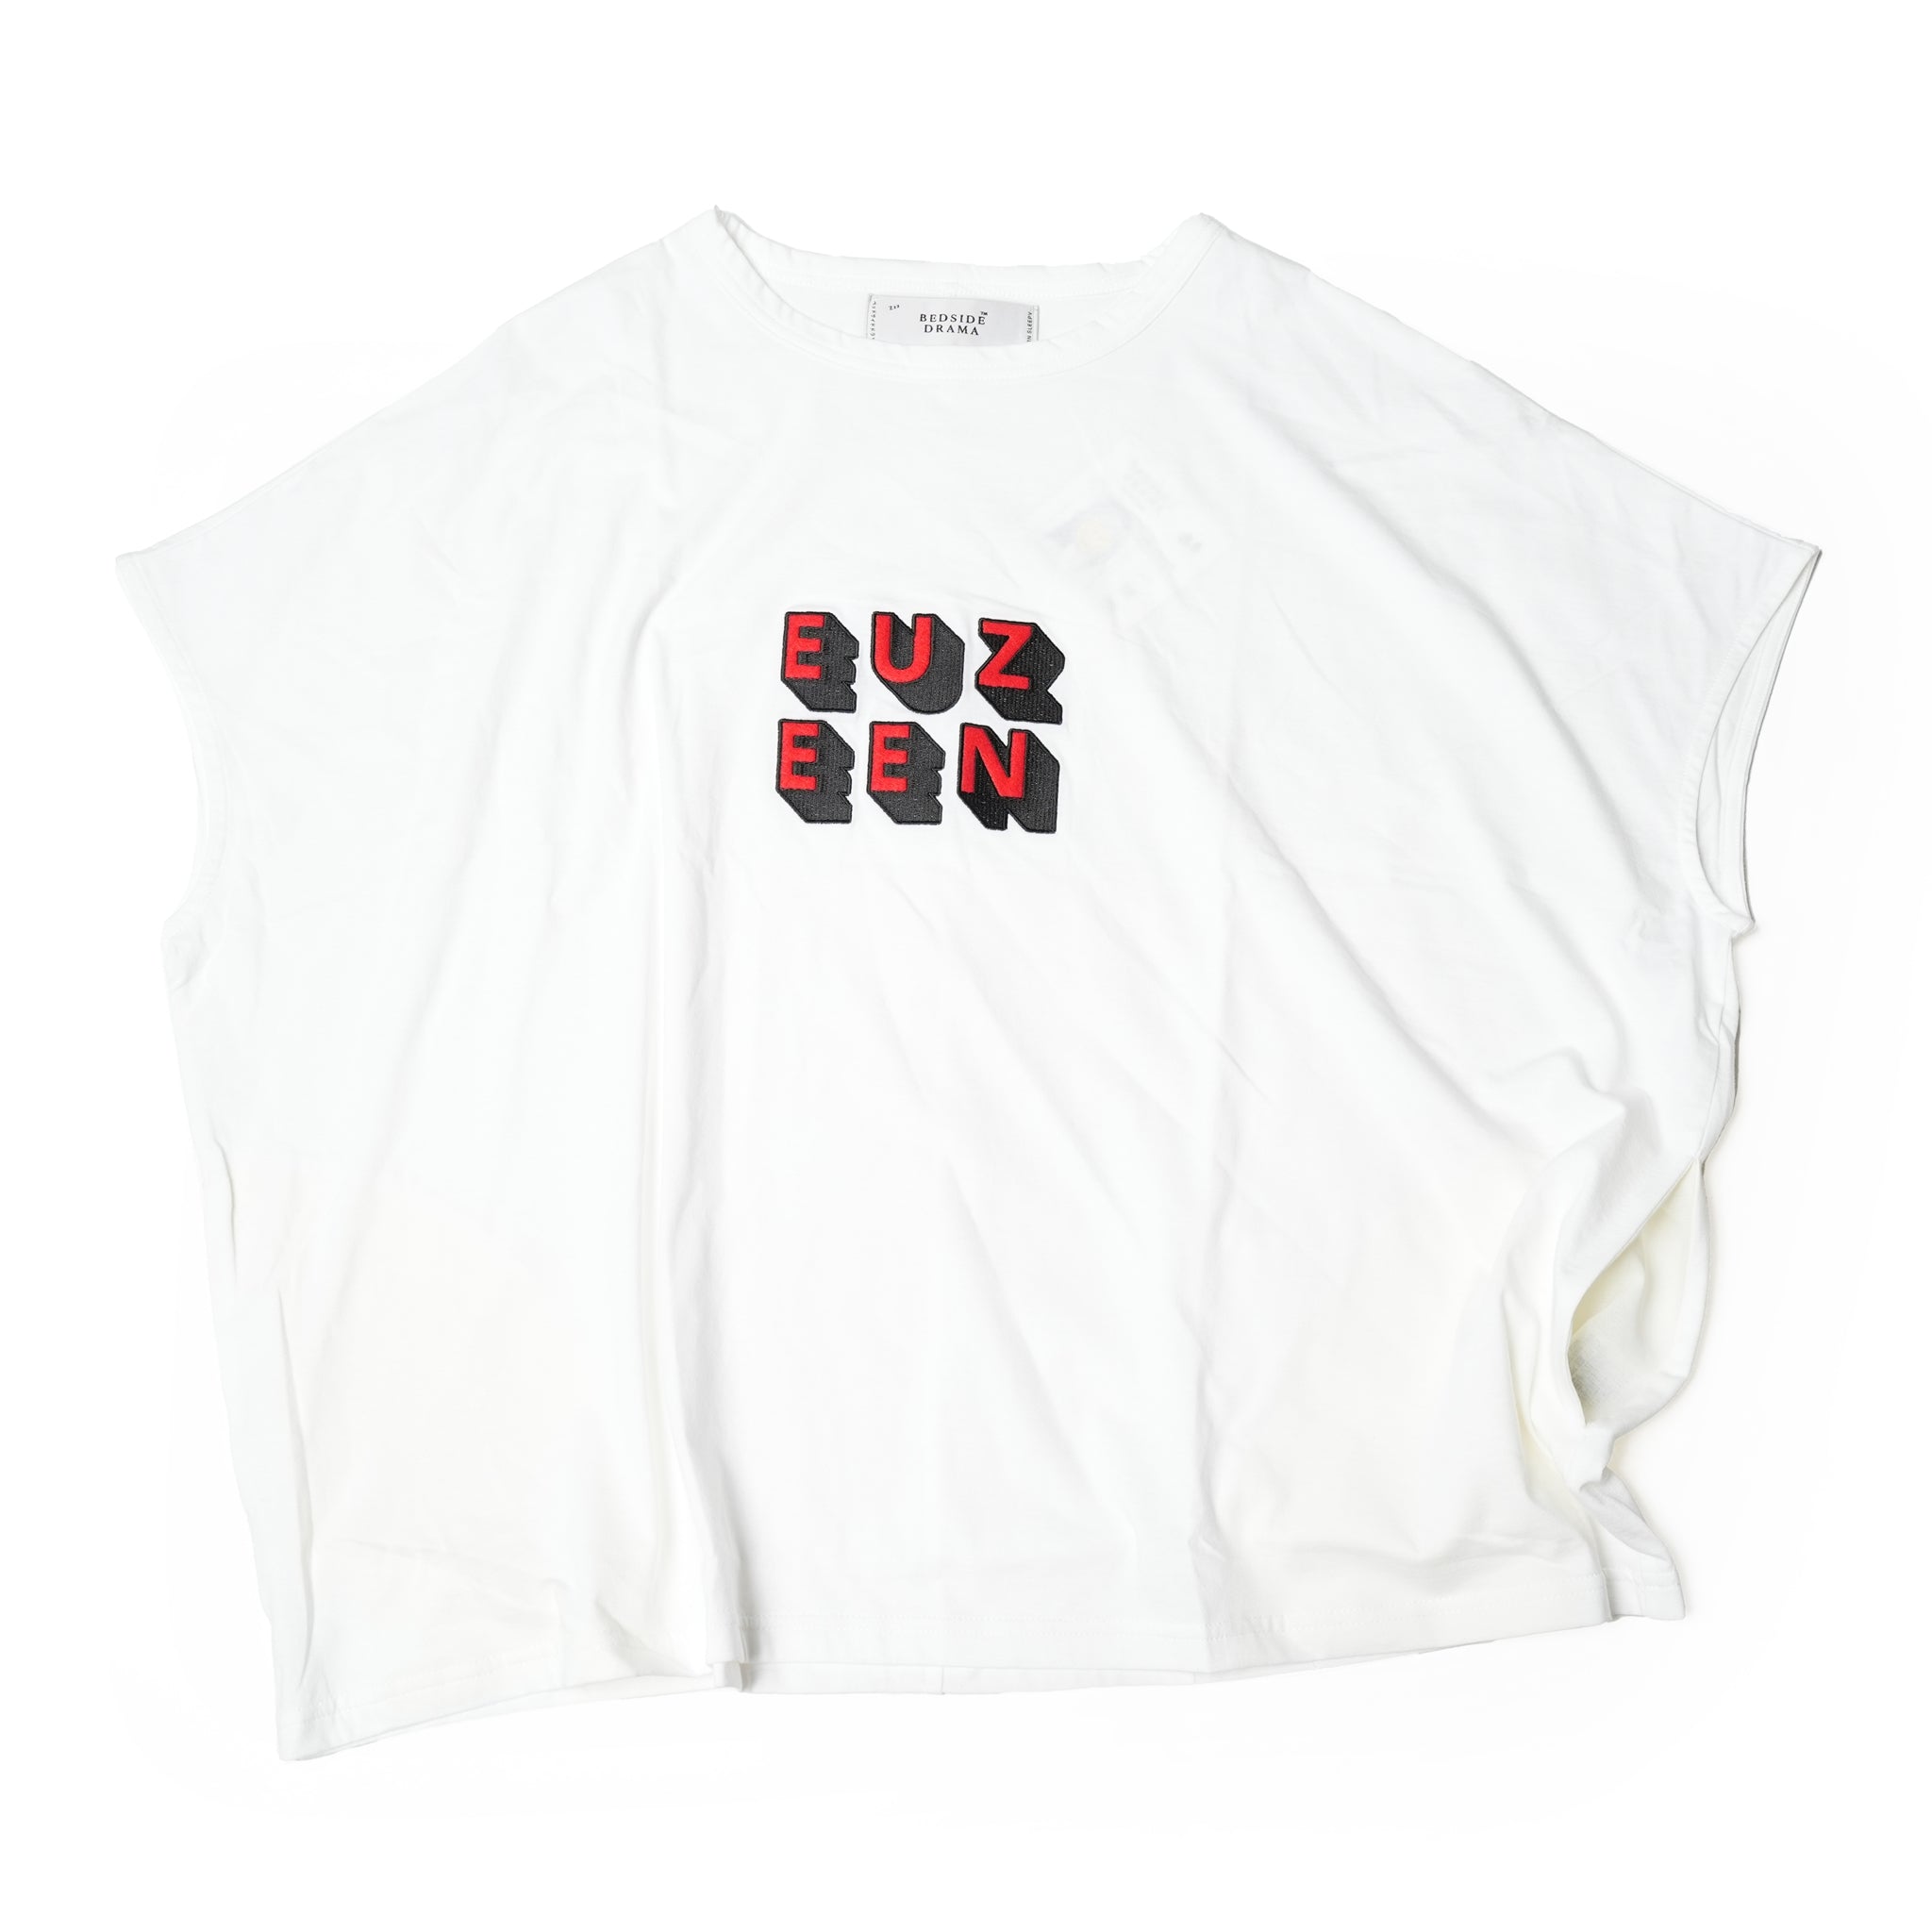 No:bsd23AW-34Ca | Name:Winter Chillout Tee/EUZEEN | Color:White【BEDSIDEDRAMA_ベッドサイドドラマ】